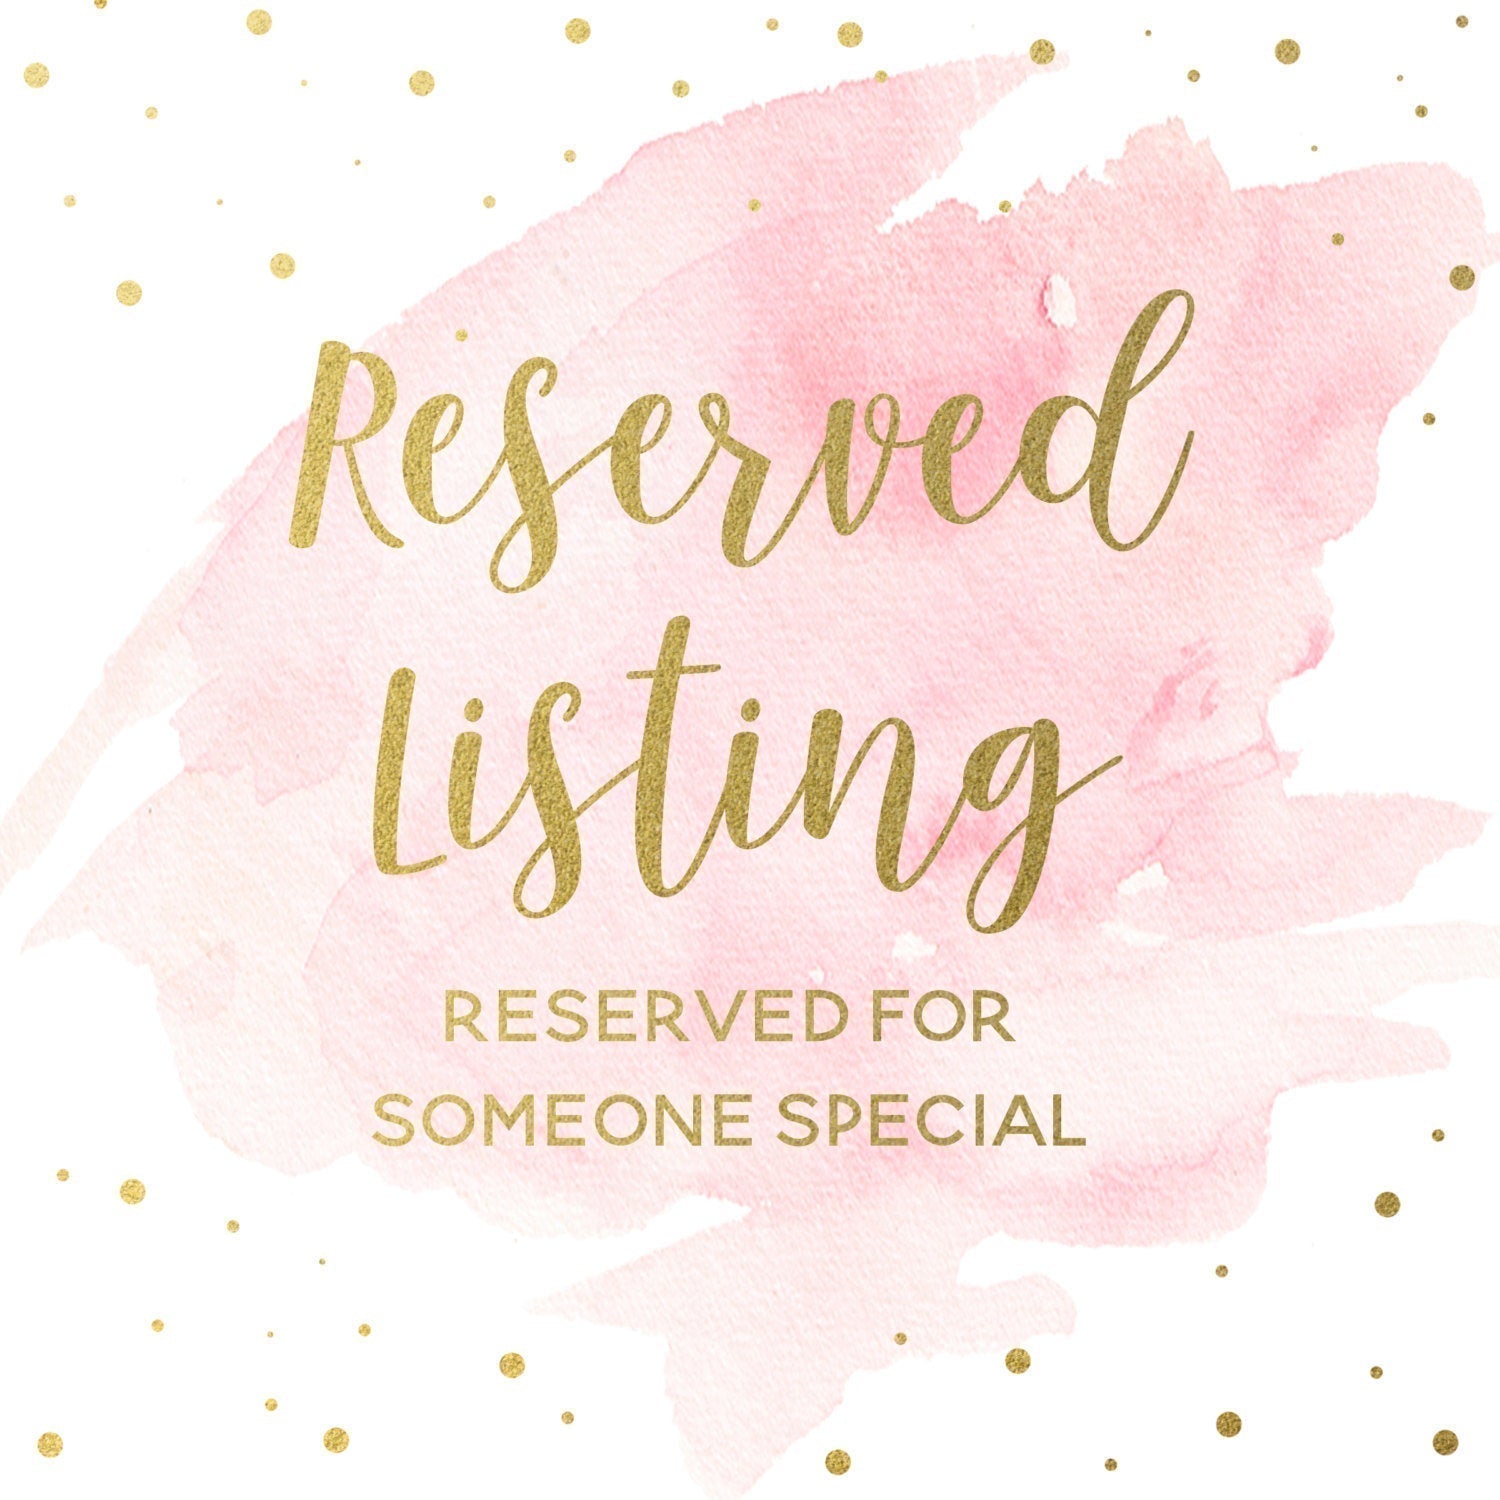 Reserved Listing - T Dahlquist